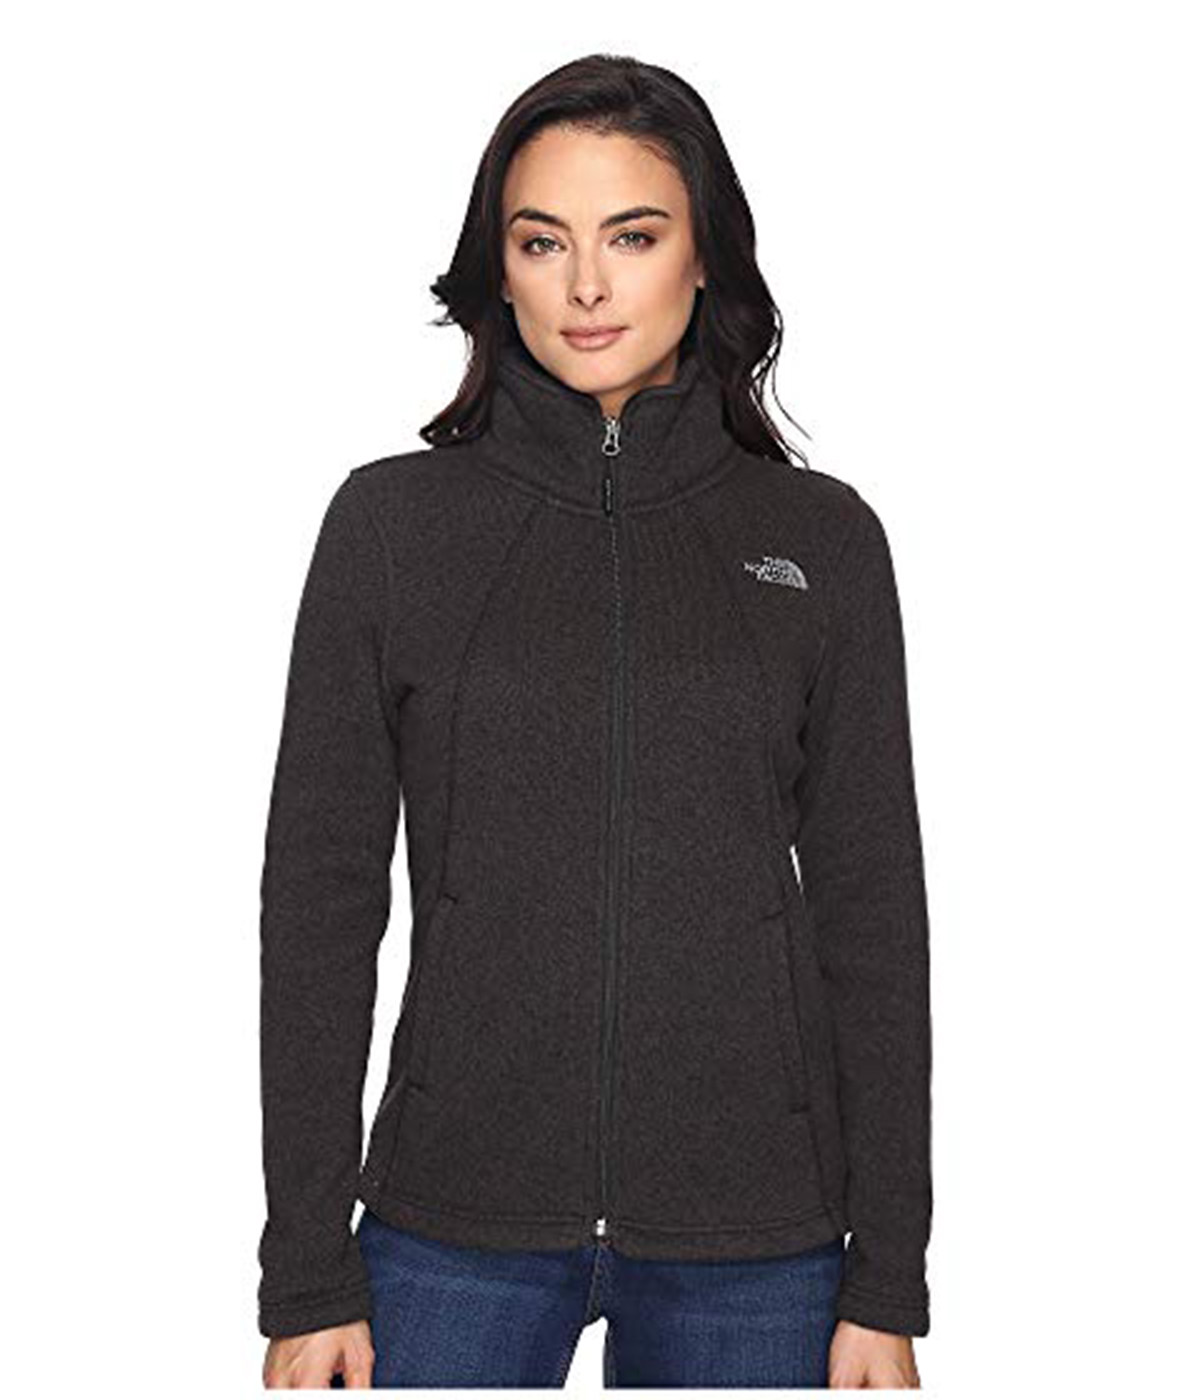 8 of Our Must-Have North Face Fleece Jackets Are on Sale at Zappos